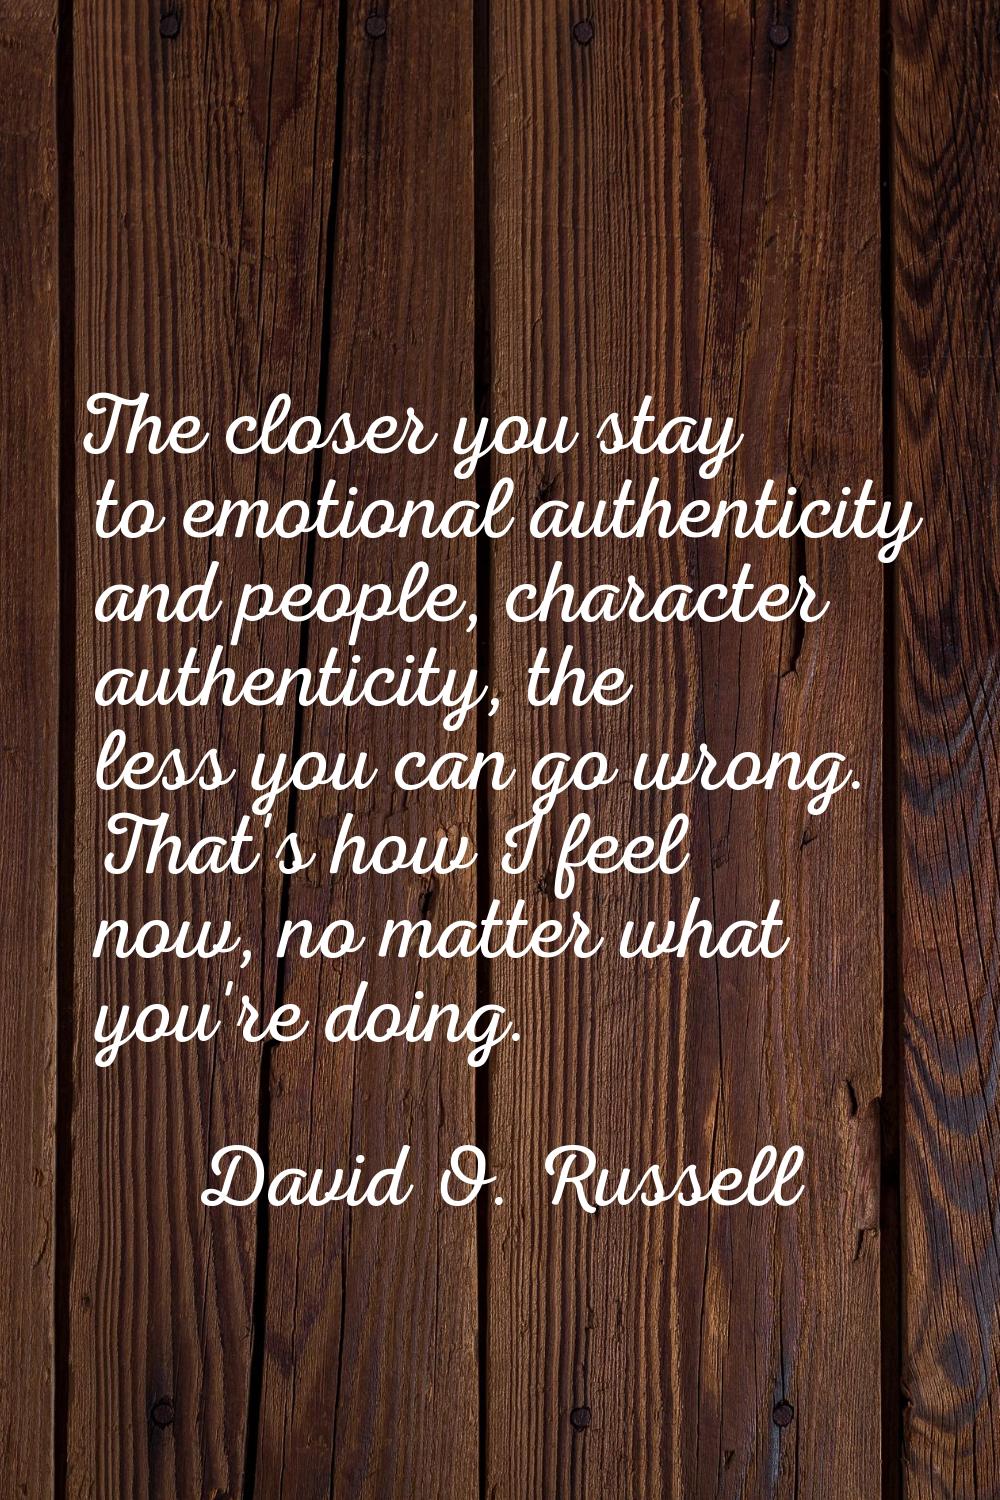 The closer you stay to emotional authenticity and people, character authenticity, the less you can 